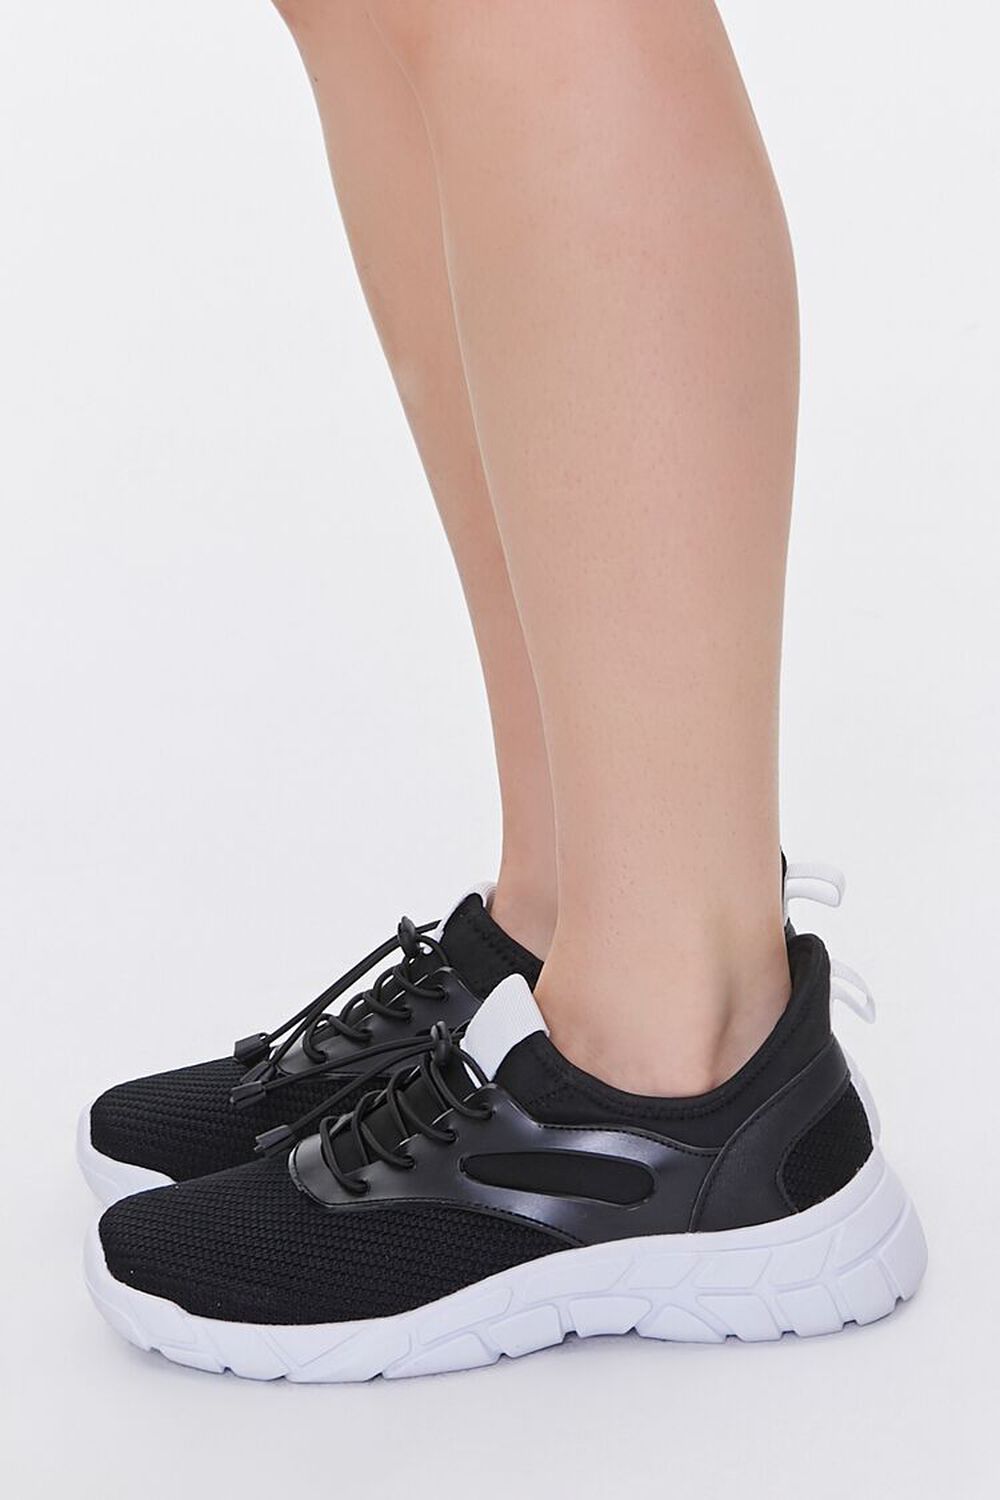 BLACK/BLACK Recycled Lace-Up Low-Top Sneakers, image 2